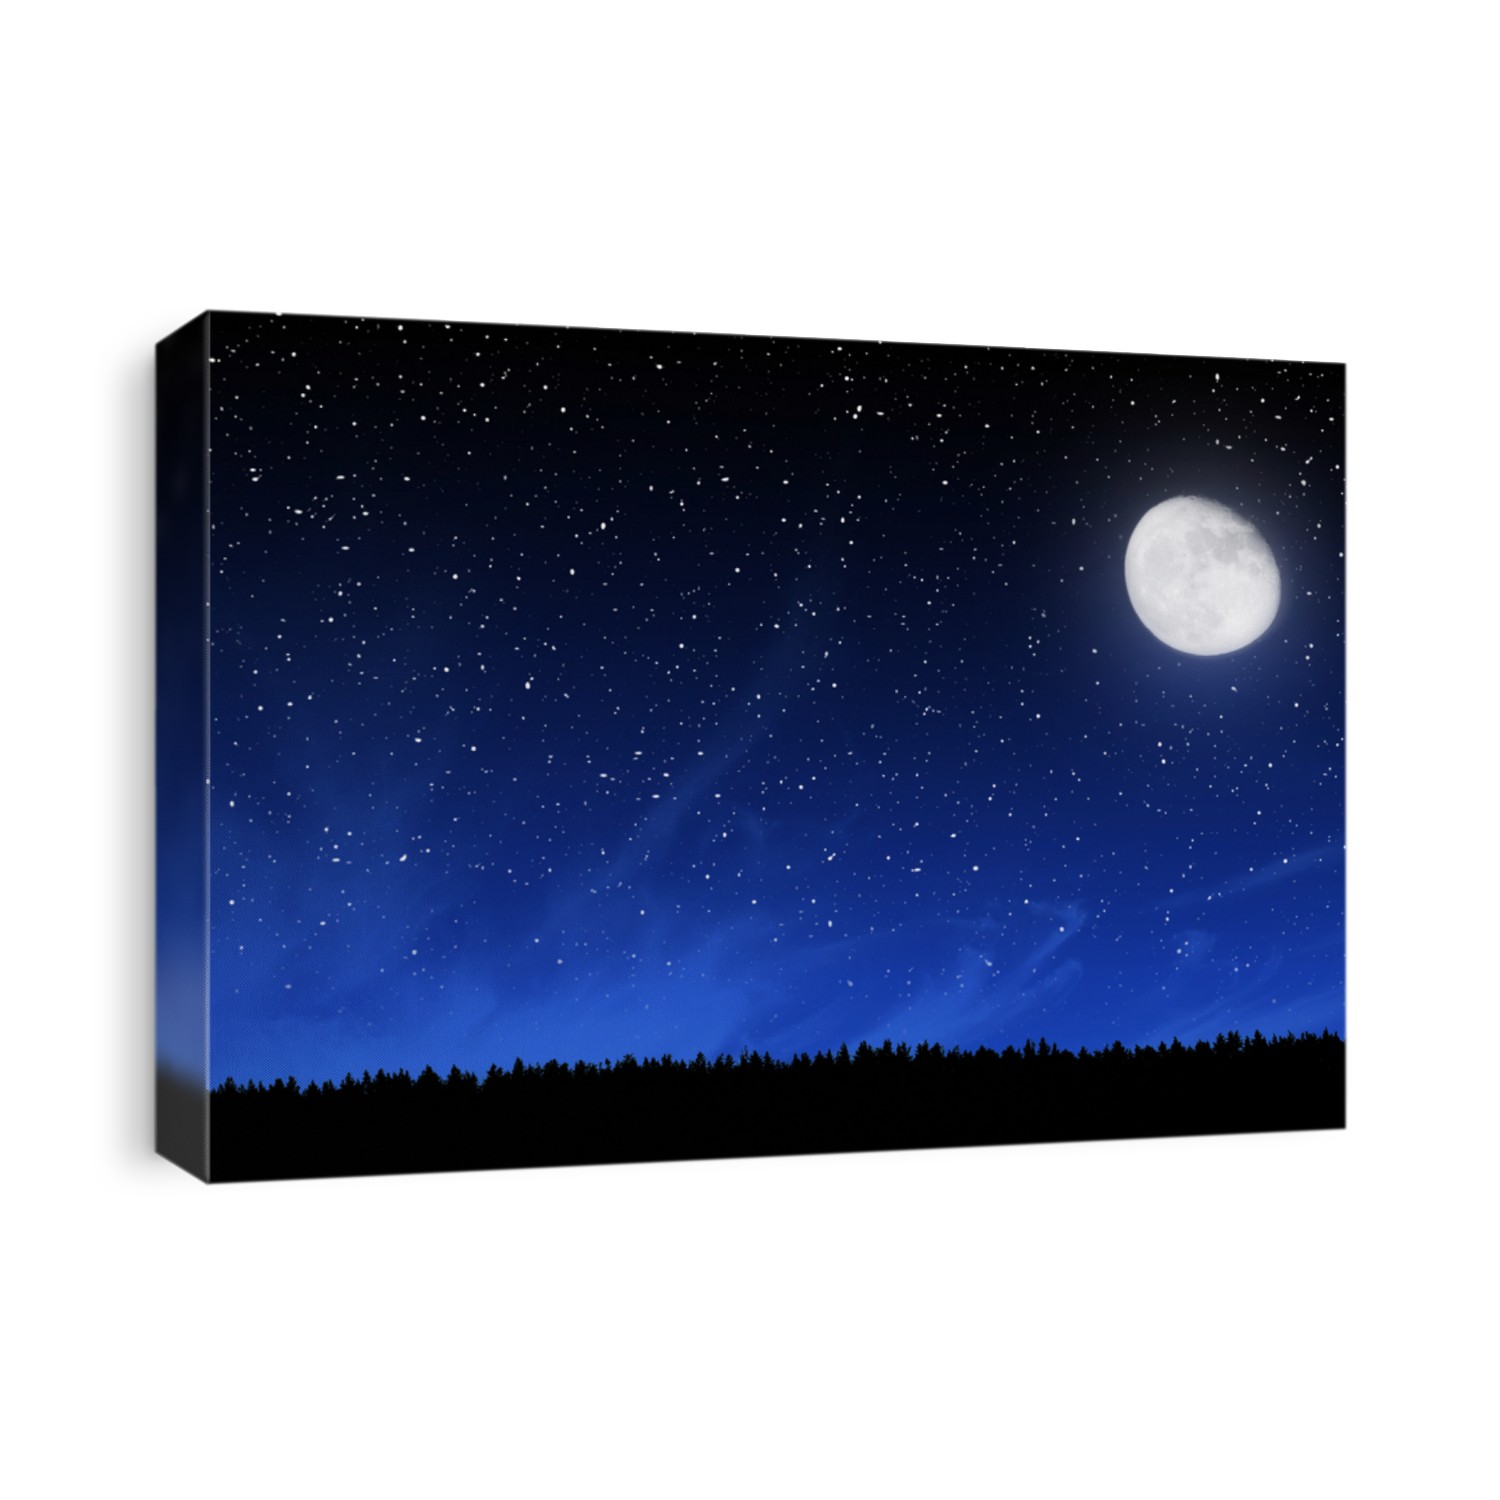 Deep night sky with many stars and moon over forest background